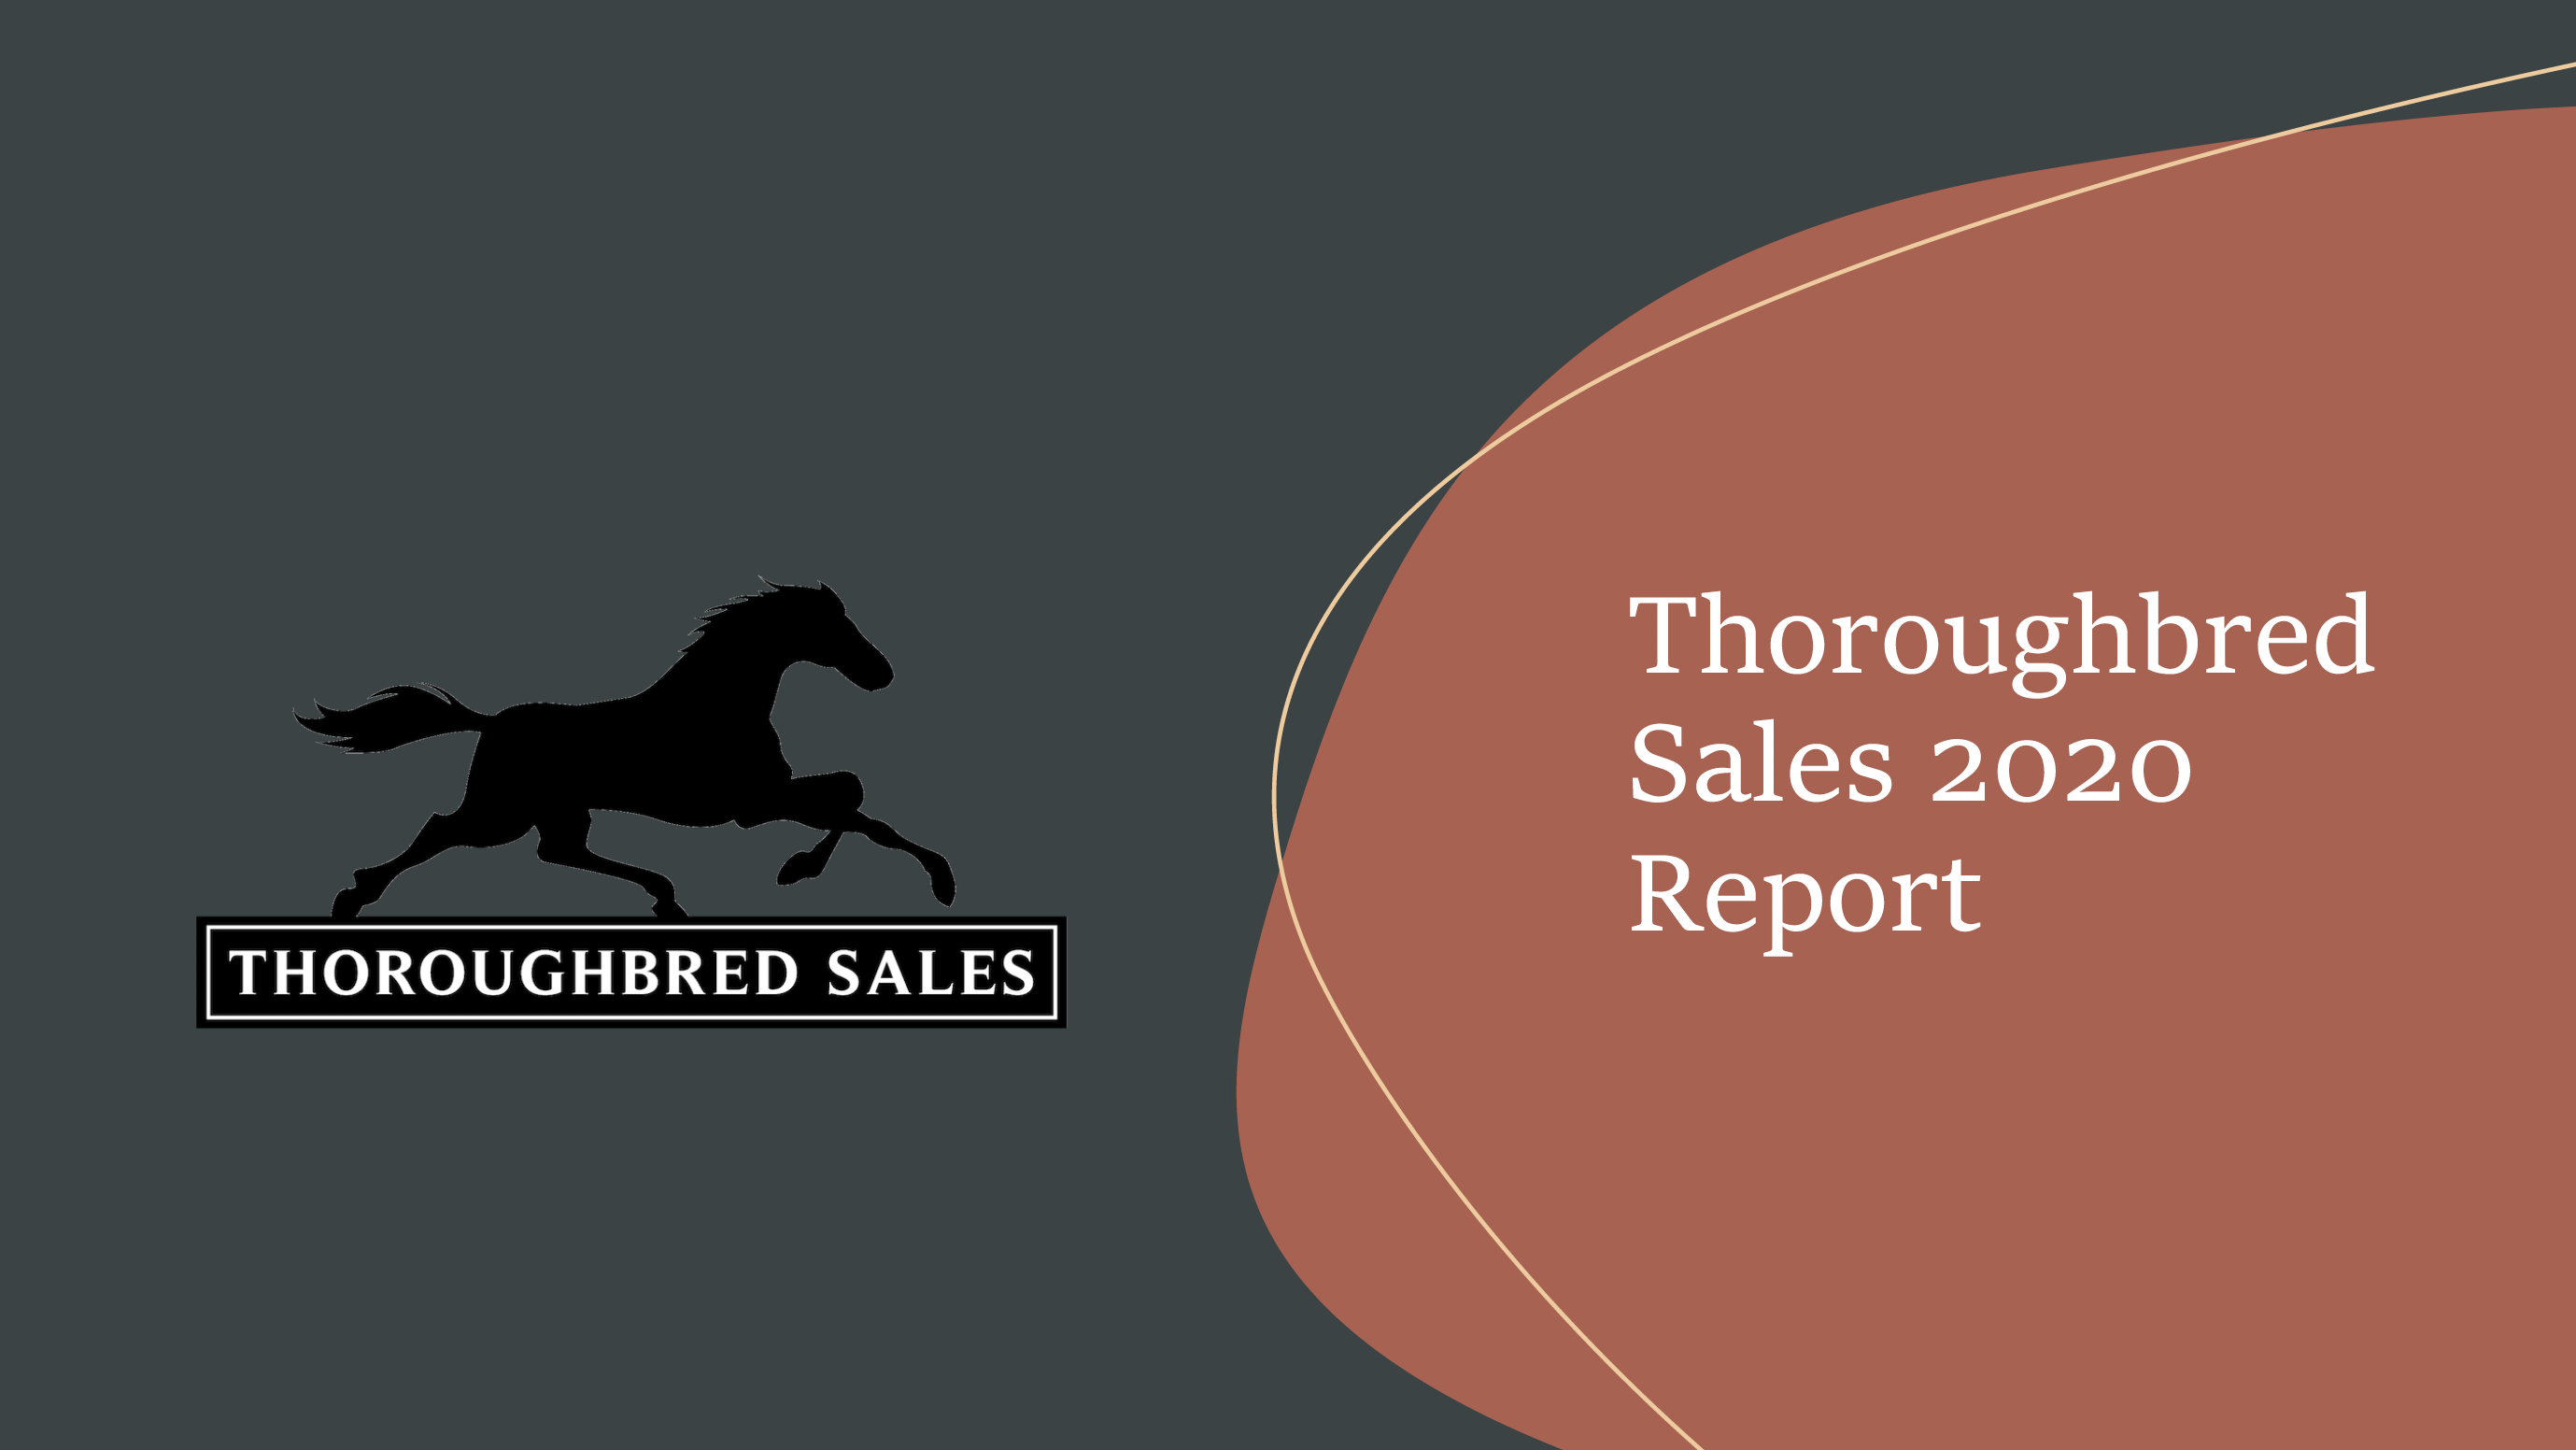 Thoroughbred Sales 2020 Report